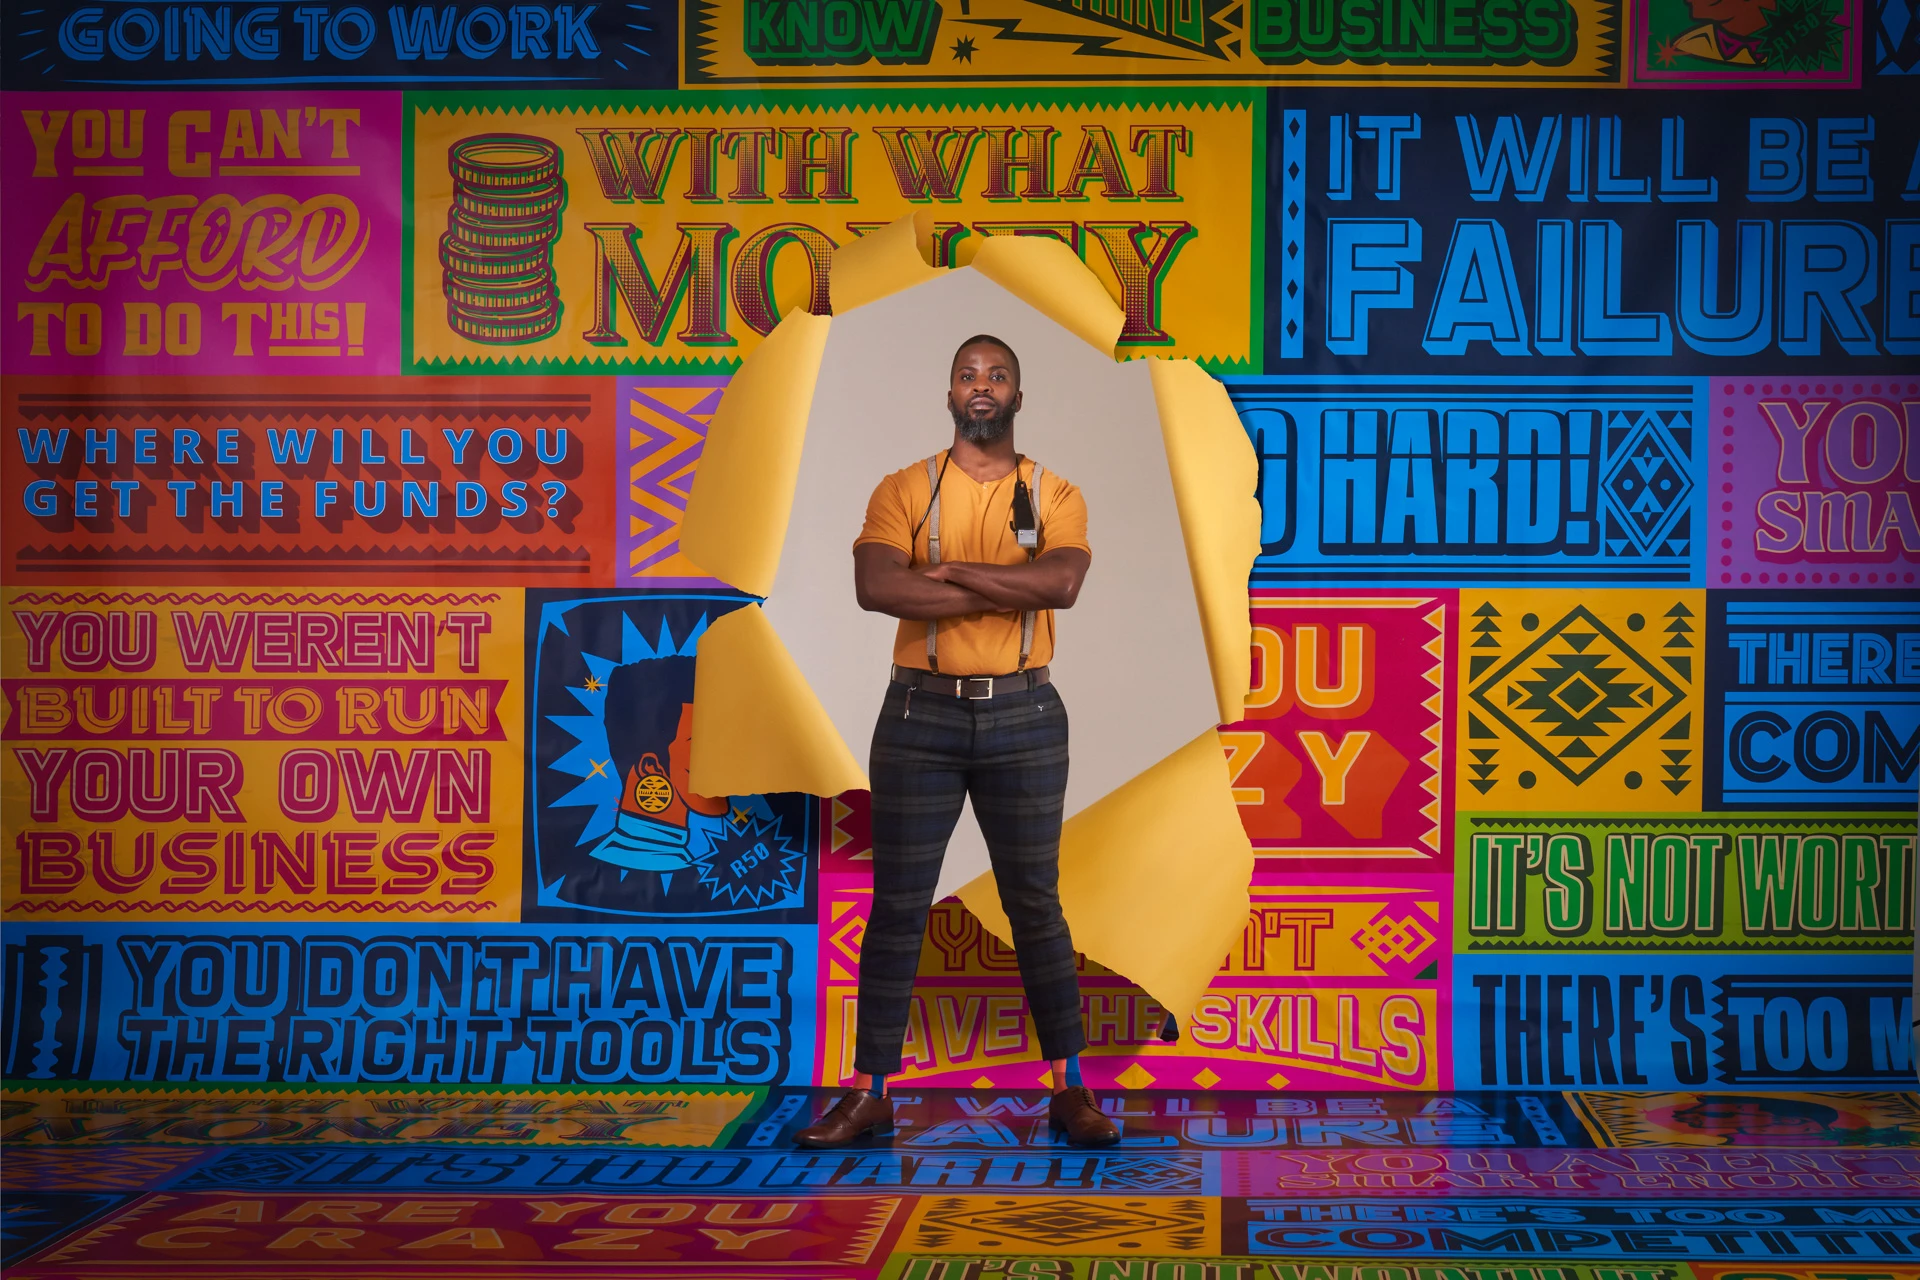 Determined man standing firm amidst a colorful backdrop filled with discouraging business-themed remarks, representing resilience and self-belief.